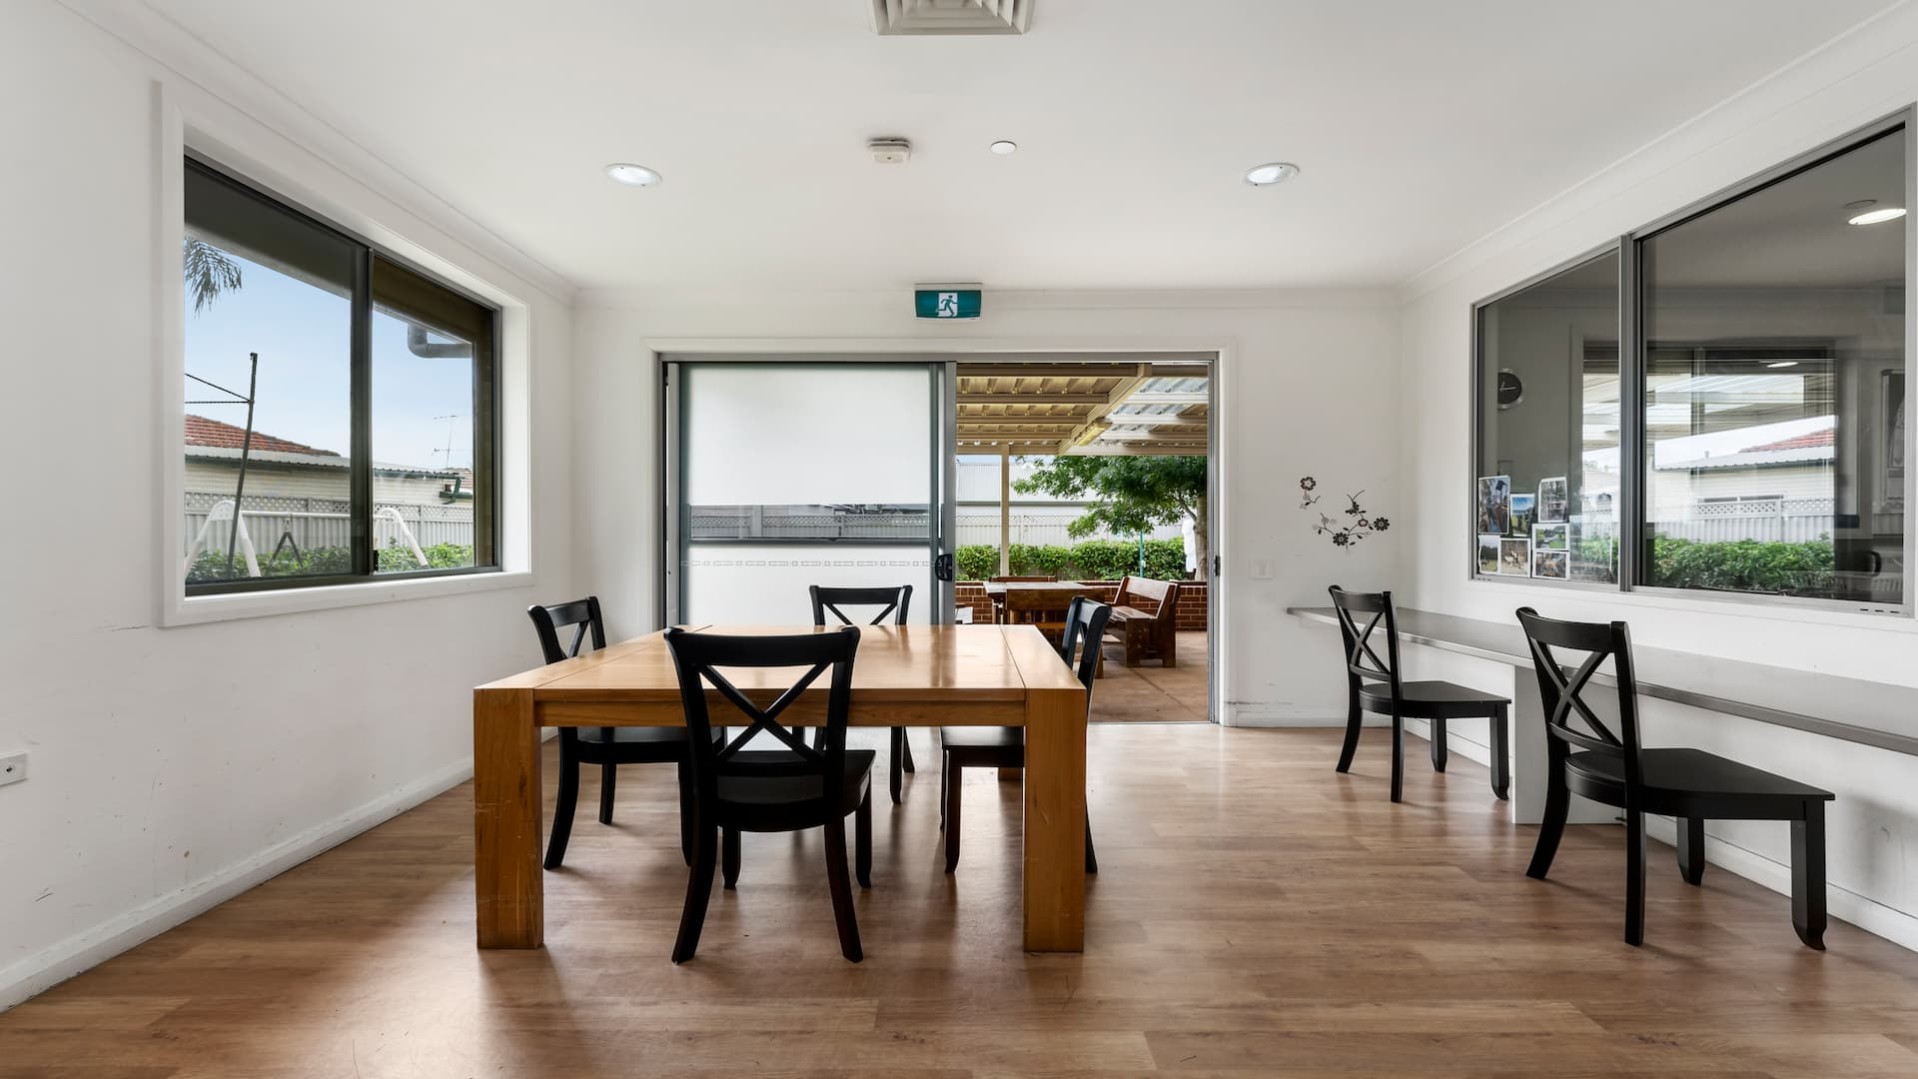 Dining area with a wooden table and chairs, and a bench running the length of the wall to the right.